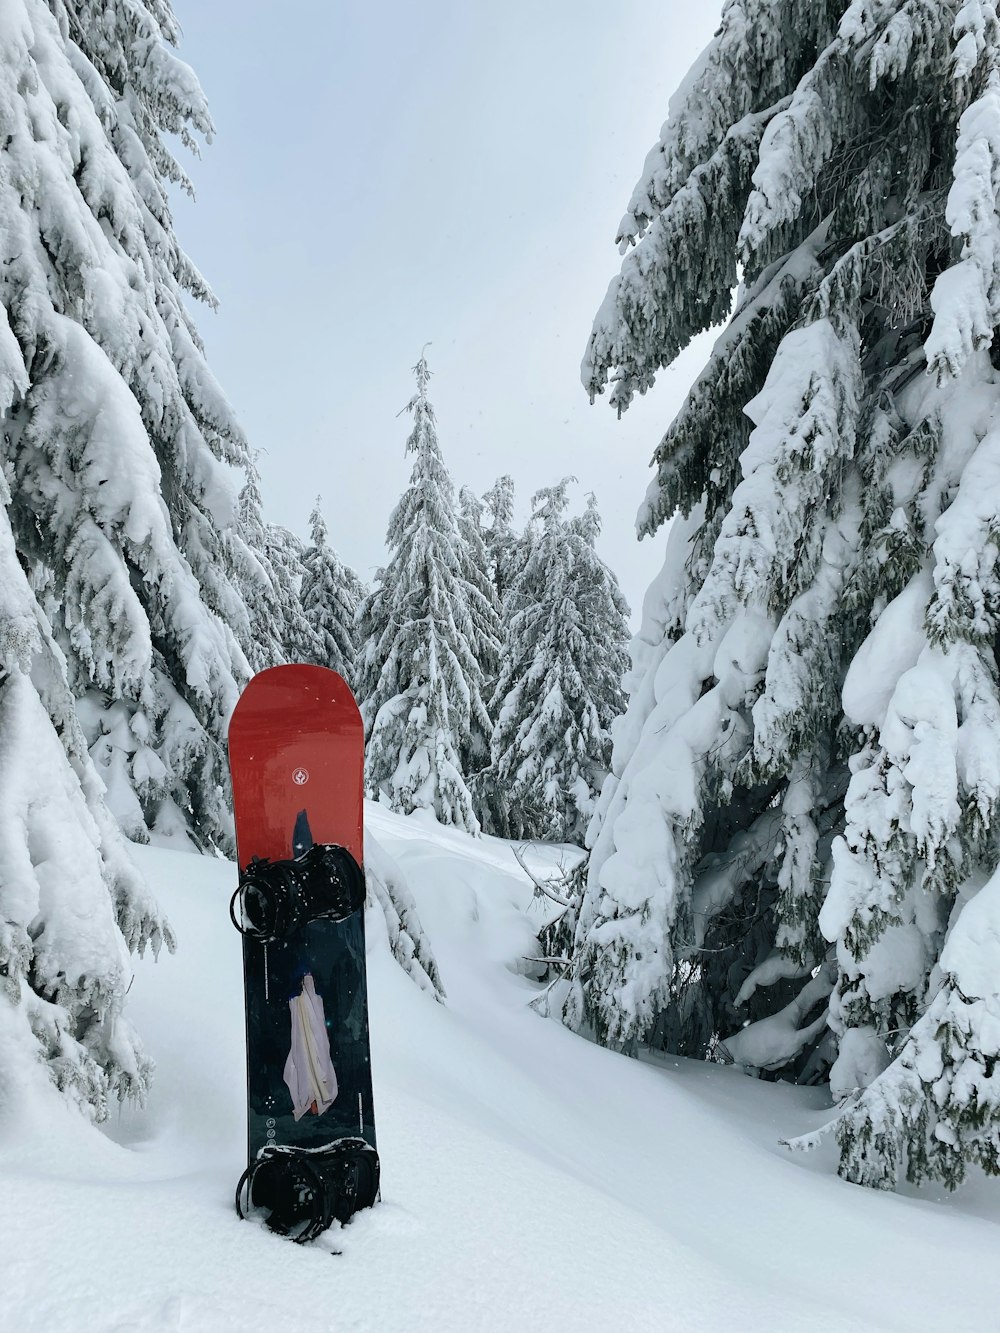 a snowboard sitting in the middle of a snowy forest